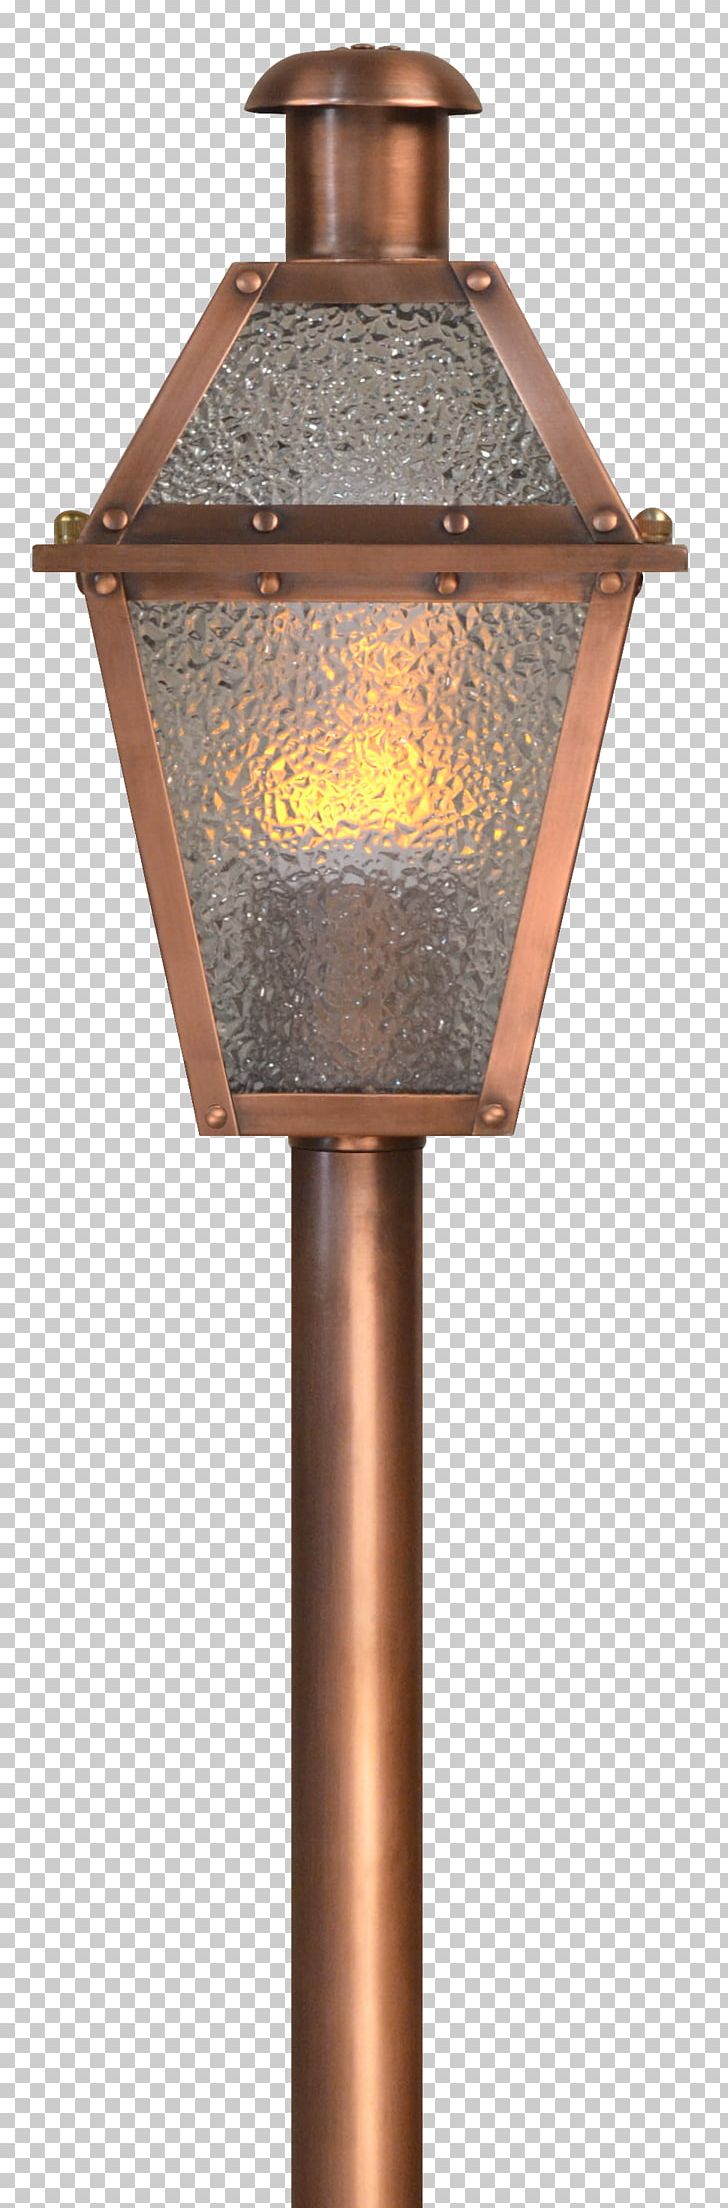 Lighting Coppersmith PNG, Clipart, Copper, Coppersmith, Flame, Light, Lightemitting Diode Free PNG Download